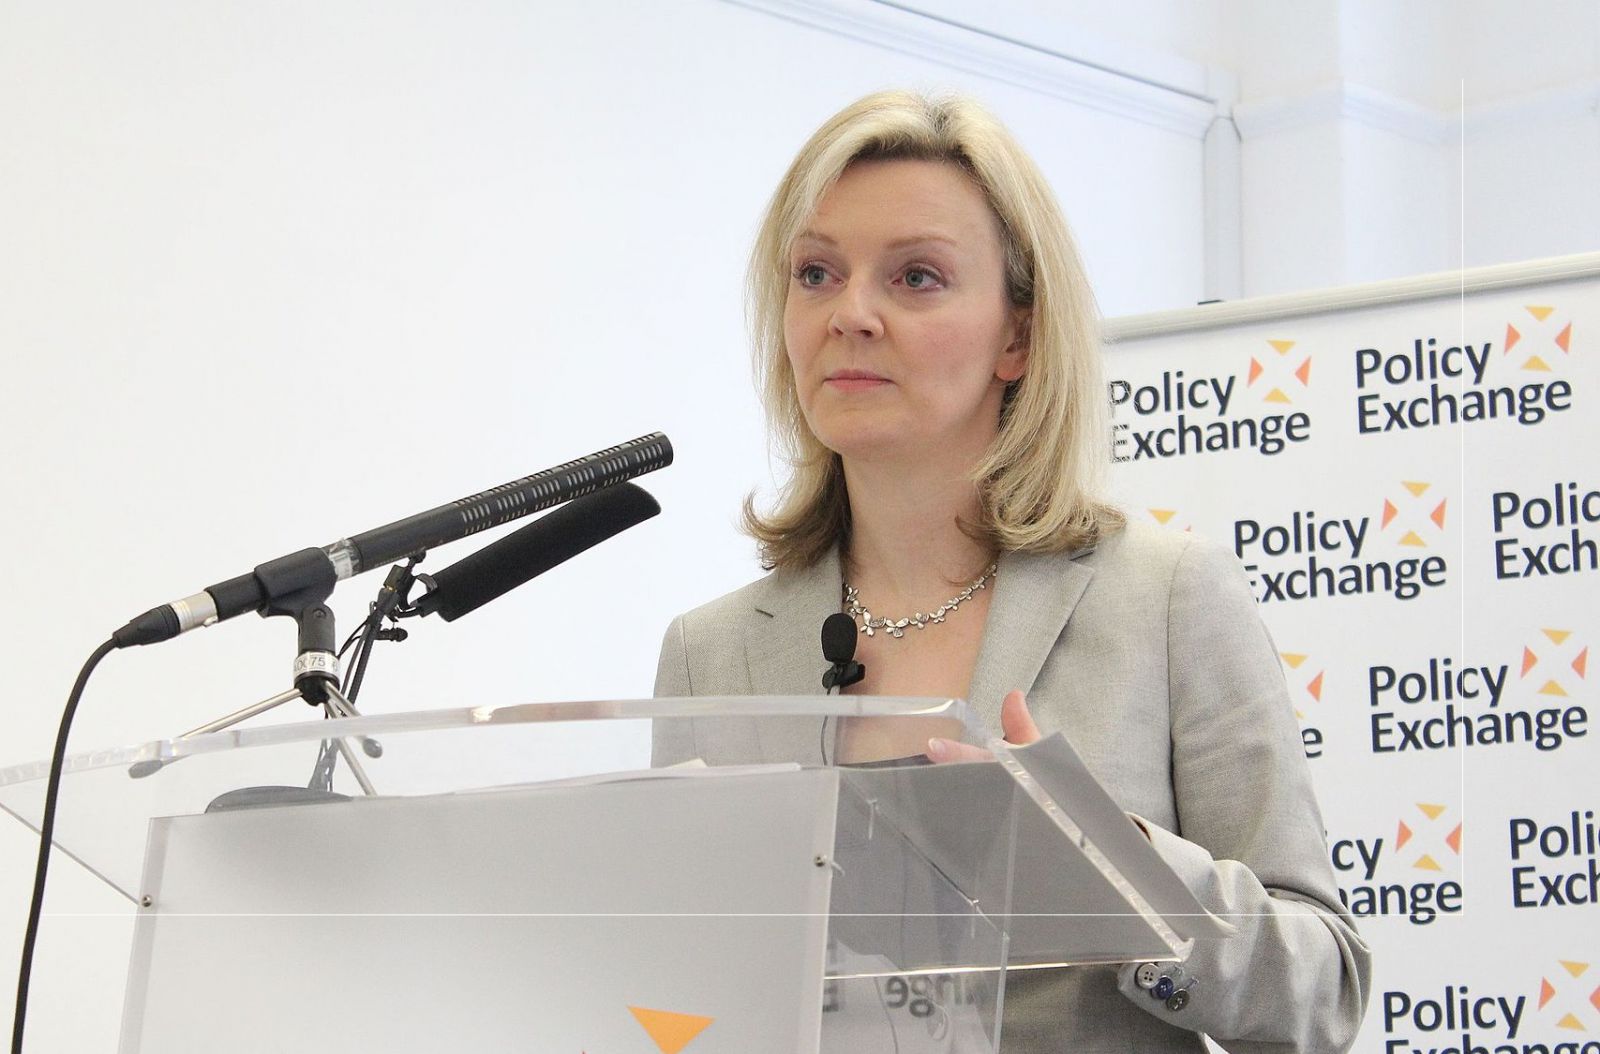 A photo of Liz Truss, current Home Secretary, standing at a podium